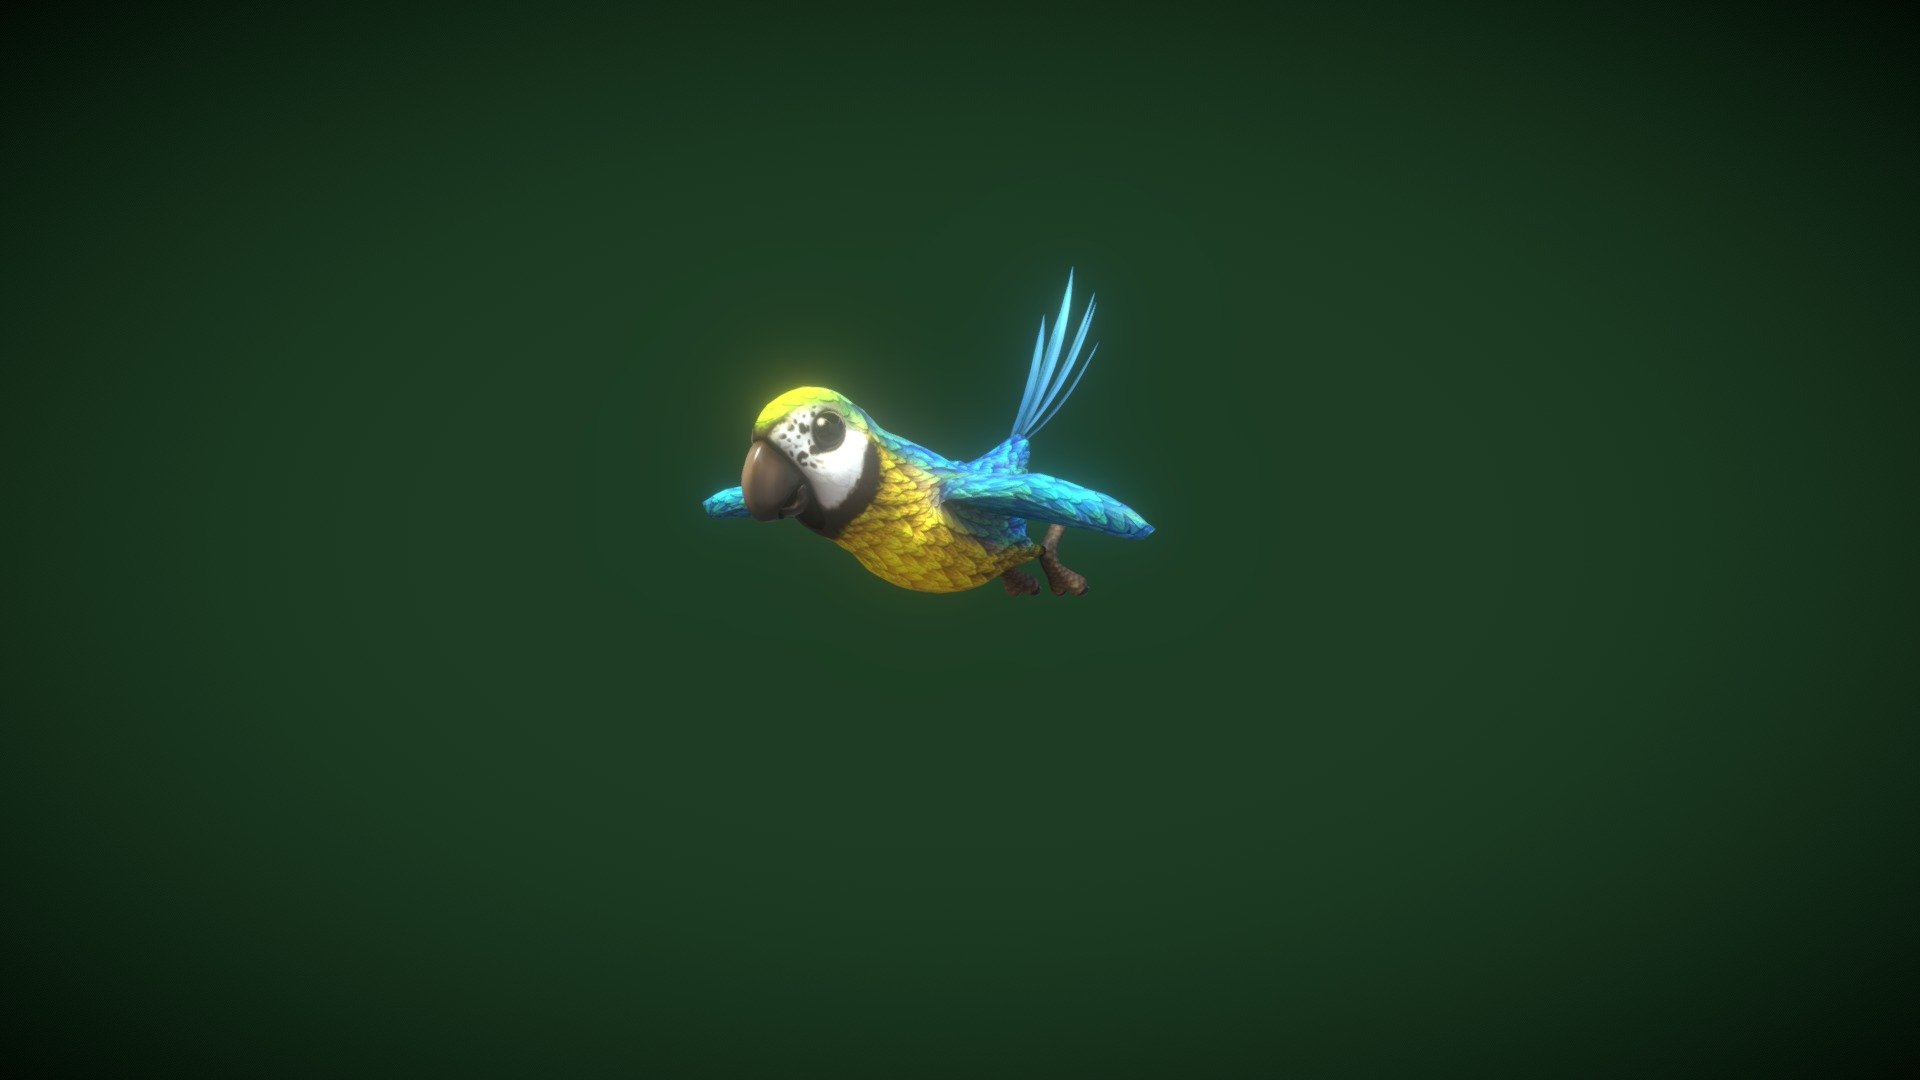 Cartoon Ara Parrot Yellow-Blue Animated 3D Model is completely ready to be used in your games, animations, films, designs etc.  

All textures and materials are included and mapped in every format. The model is completely ready for visualization in any 3d software and engine.  

Technical details:  




File formats included in the package are: FBX, OBJ, GLB, ABC, DAE, PLY, STL, BLEND, gLTF (generated), USDZ (generated)

Native software file format: BLEND

Render engine: Eevee

Parrot - Polygons: 4,275, Vertices: 3,983

Branch - Polygons: 268, Vertices: 250

Textures: Color, Metallic, Roughness, Normal, AO

All textures are 2k resolution.

The model is rigged and animated.

7 animations are included: idle, talk, walk, take off, fly, glide, land. All animations (besides the take off and the landing) are full cycles.

Only following formats contain rig and animation: BLEND, FBX, GLTF/GLB
 - Cartoon Ara Parrot Yellow-Blue Animated 3D Model - Buy Royalty Free 3D model by 3DDisco 3d model